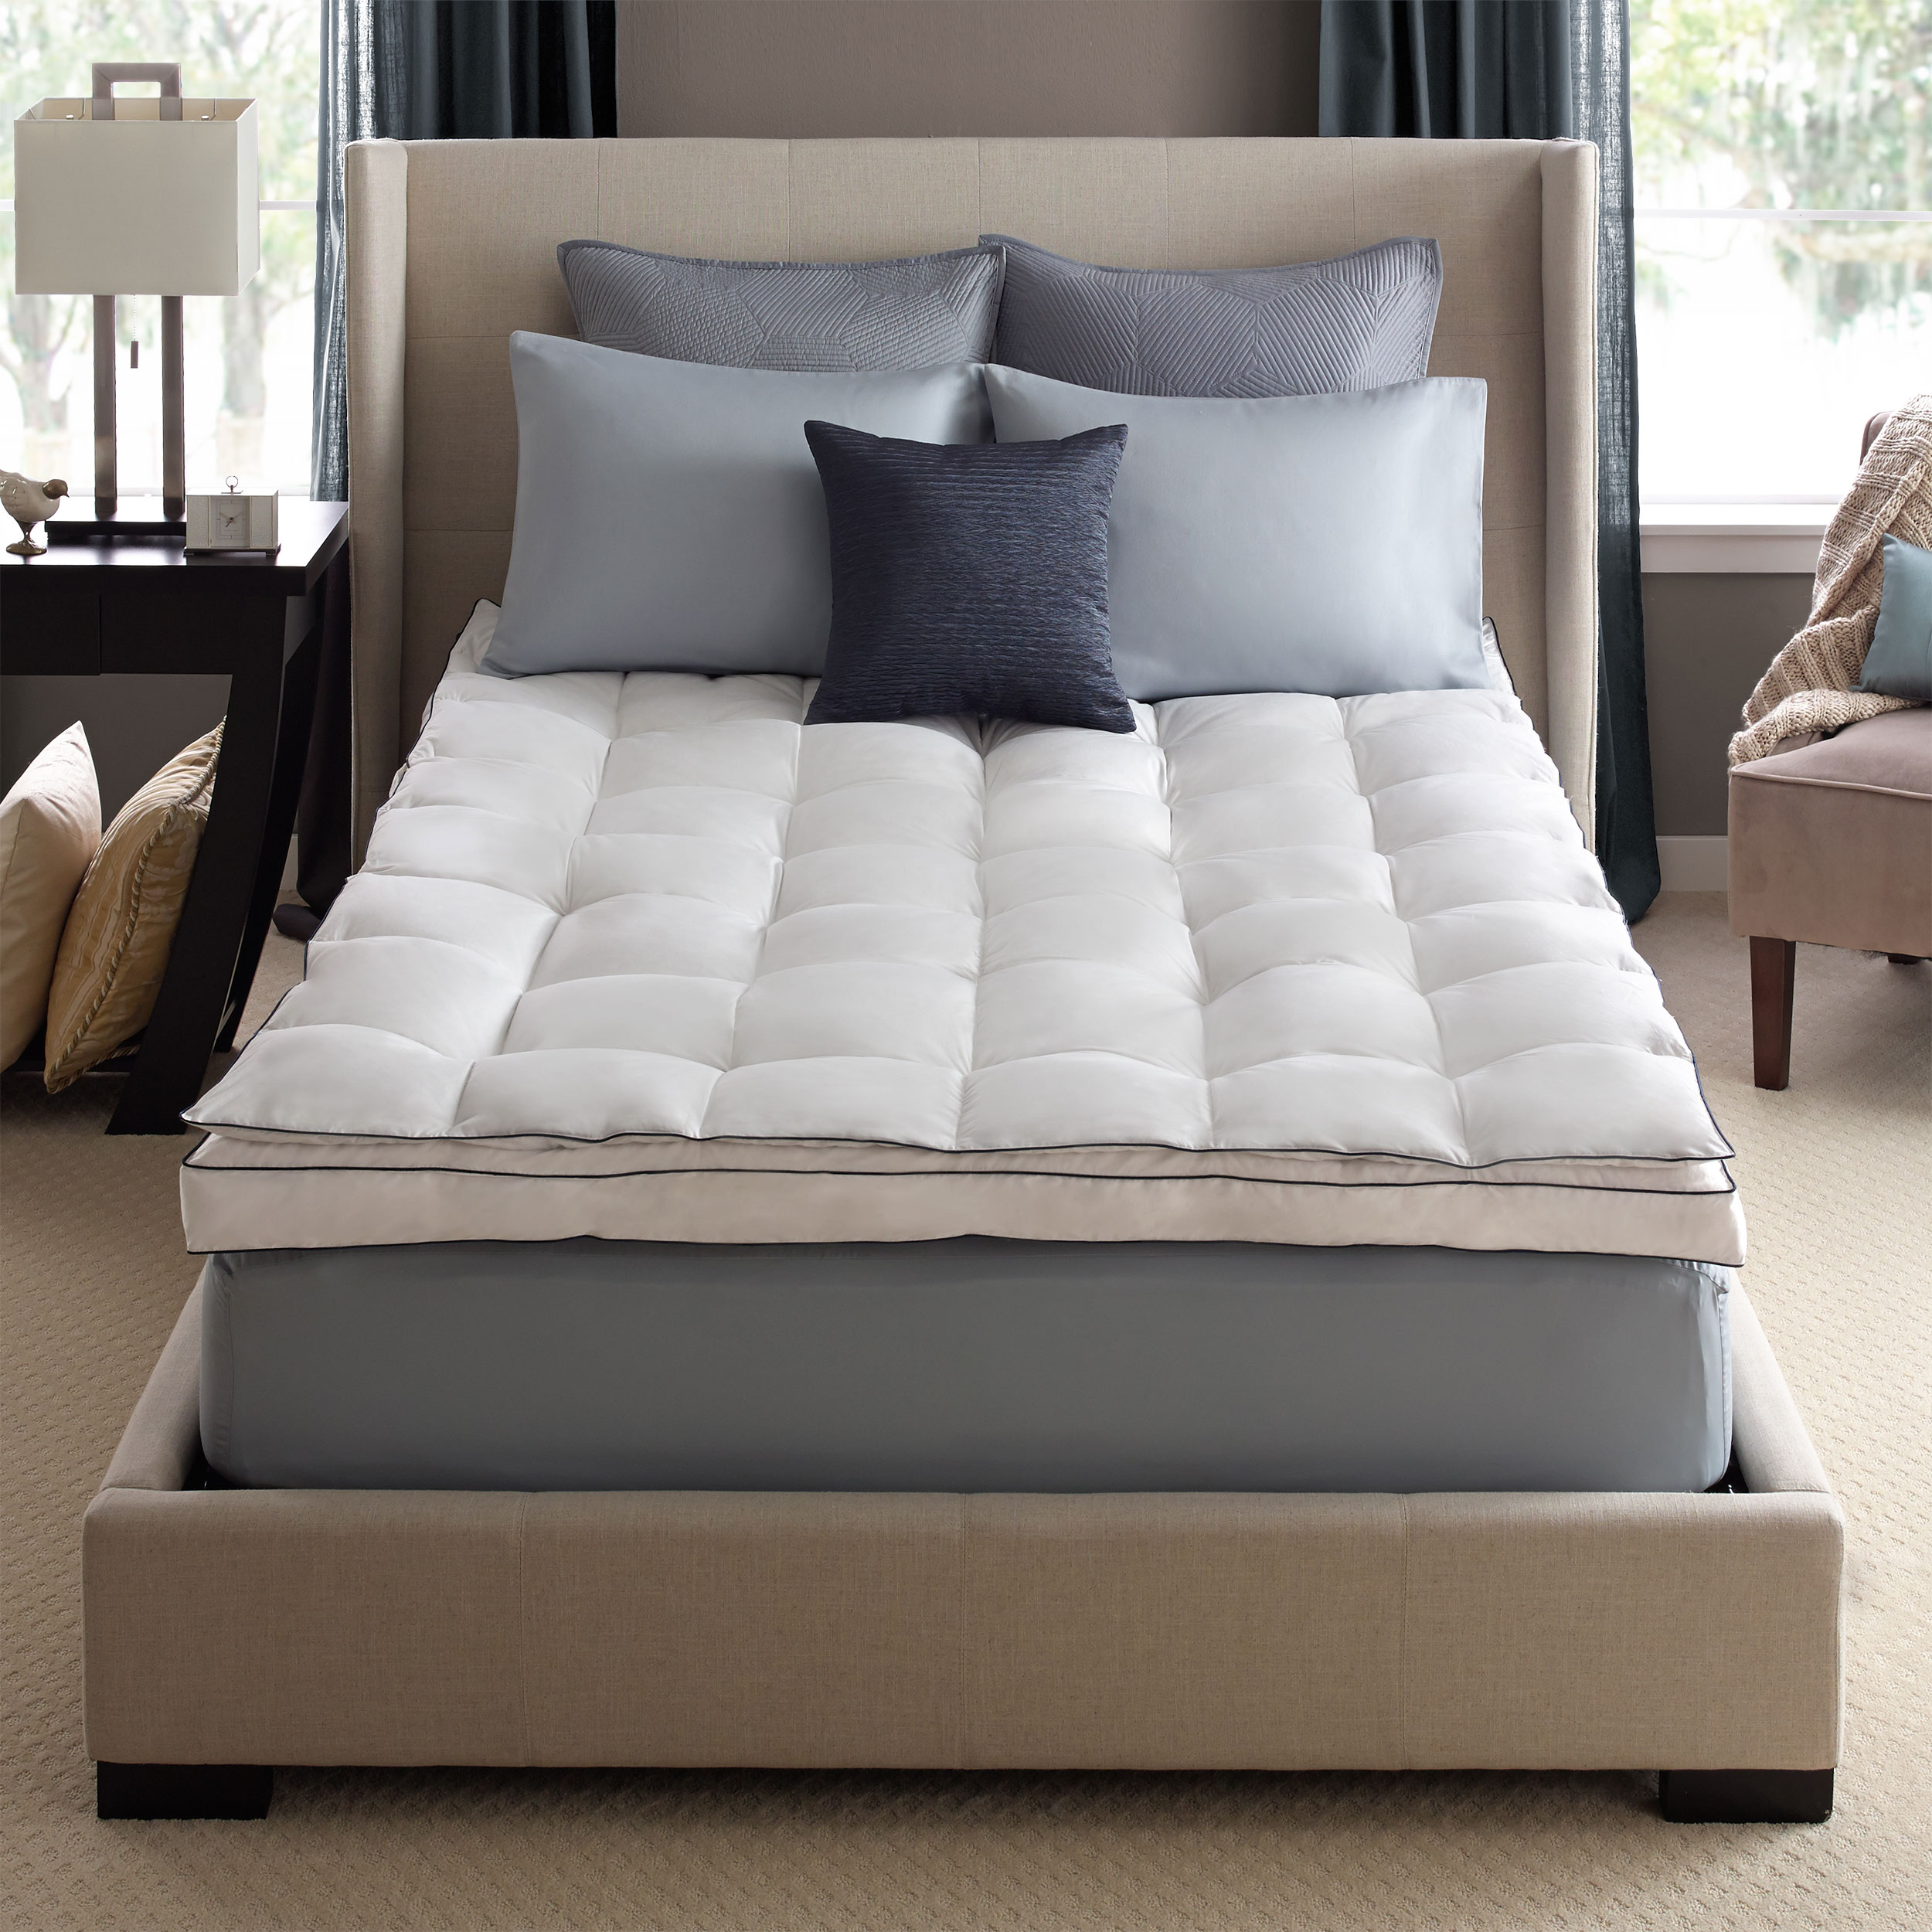 Feather bed cover